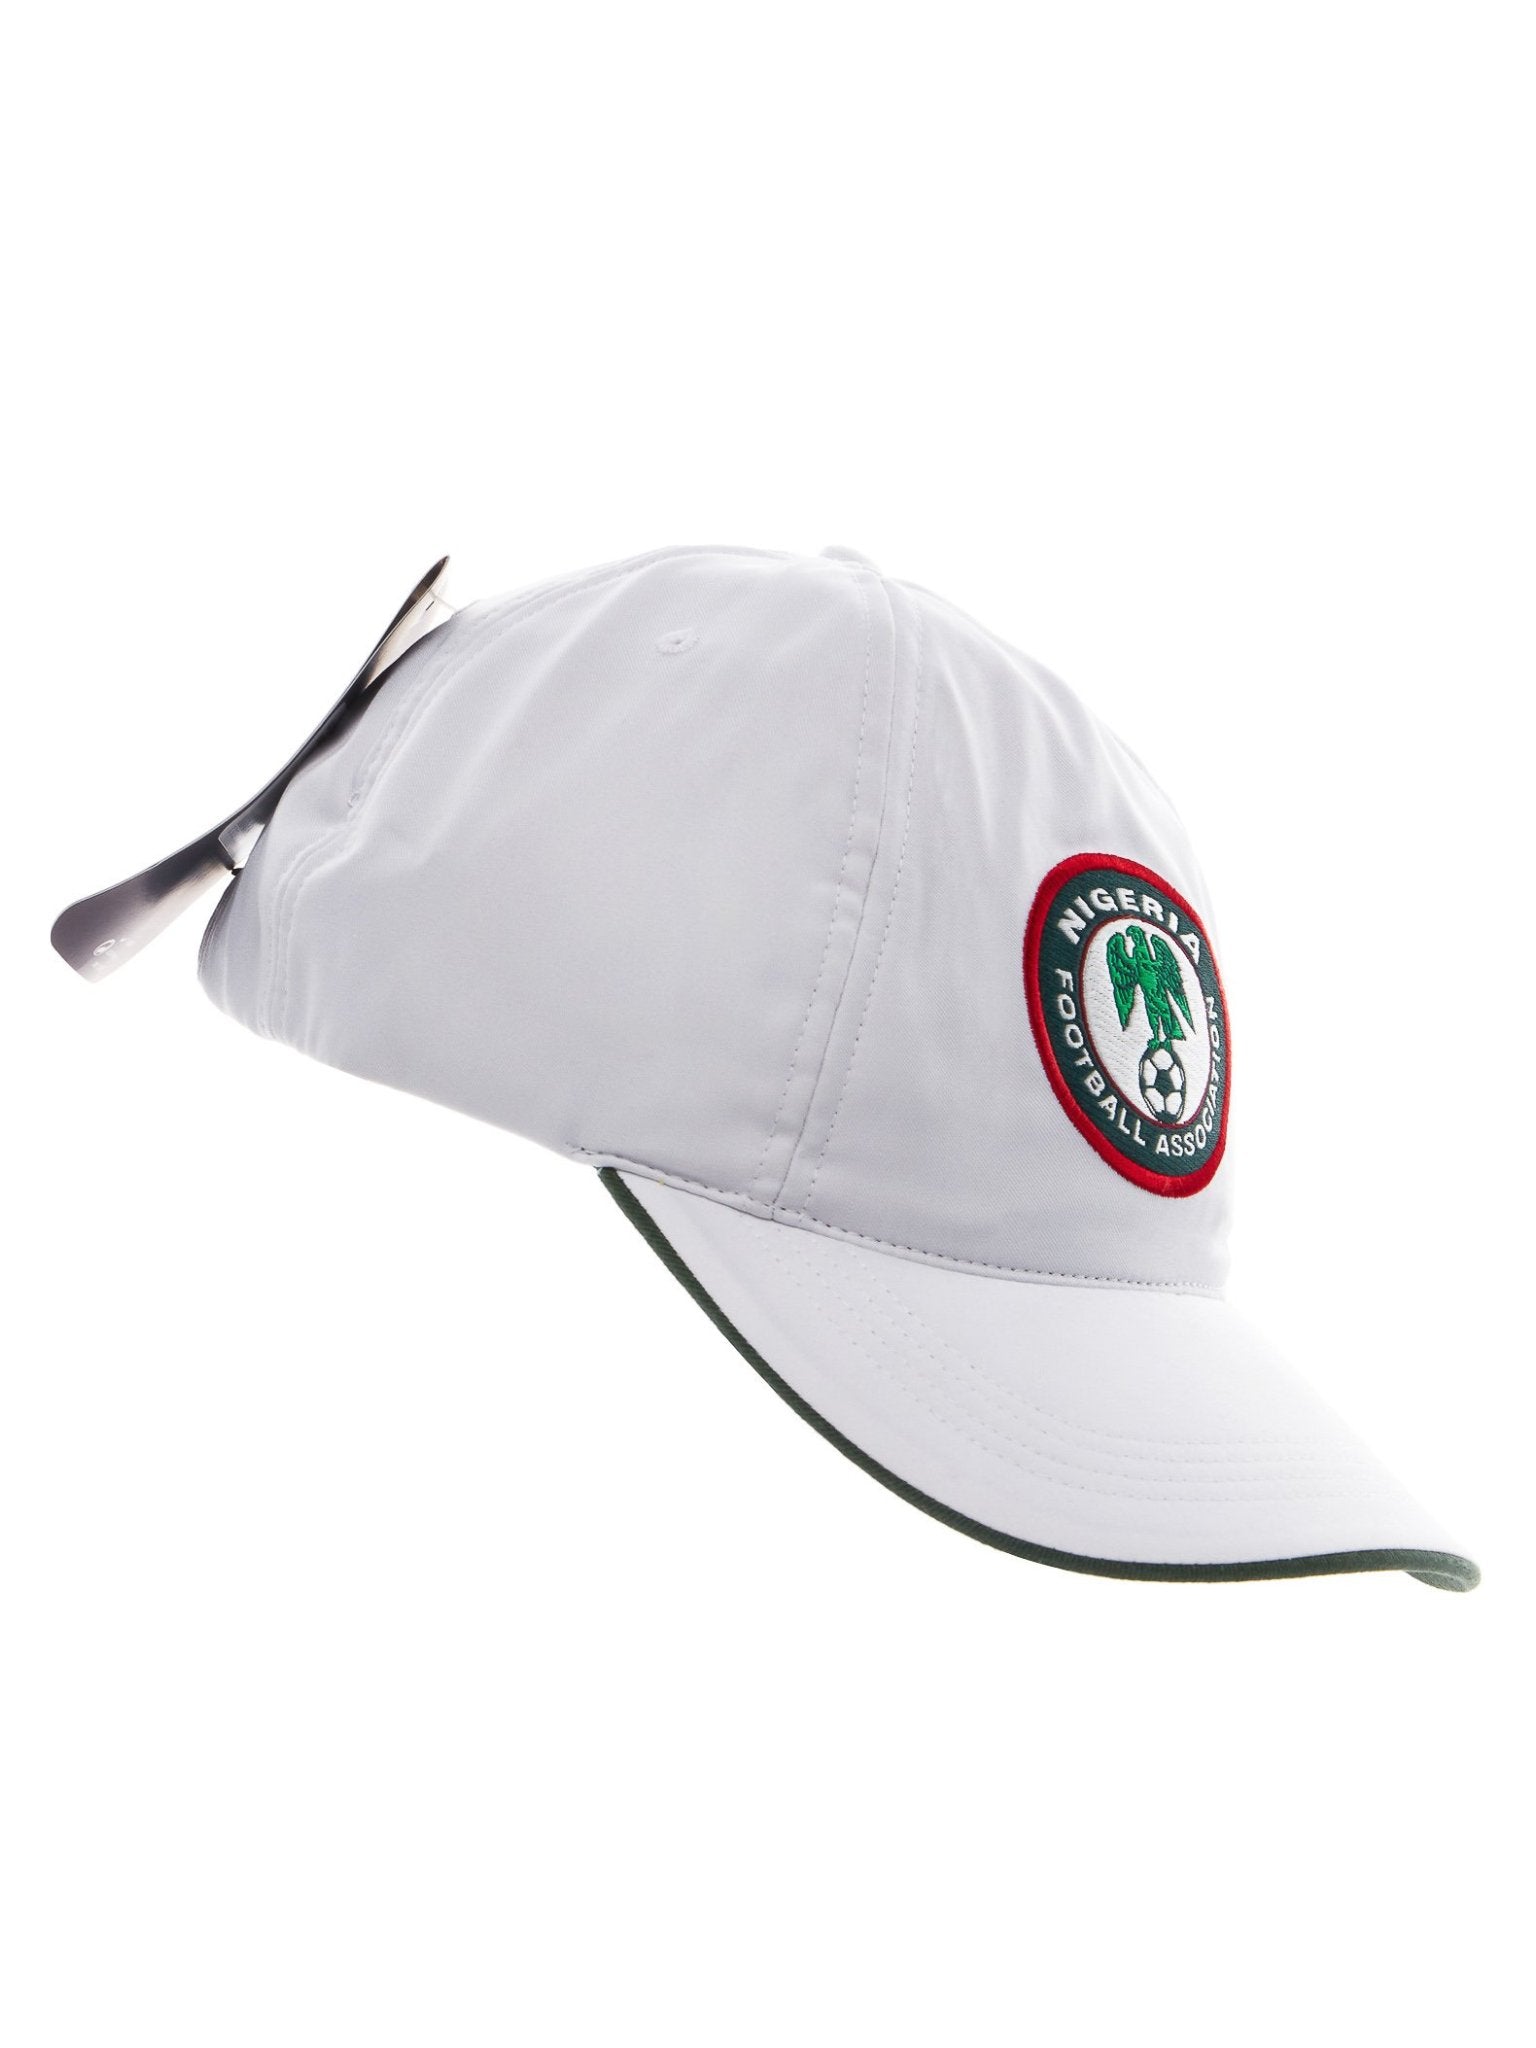 Nigeria Early 2000's Nike Cap-Unwanted FC-stride